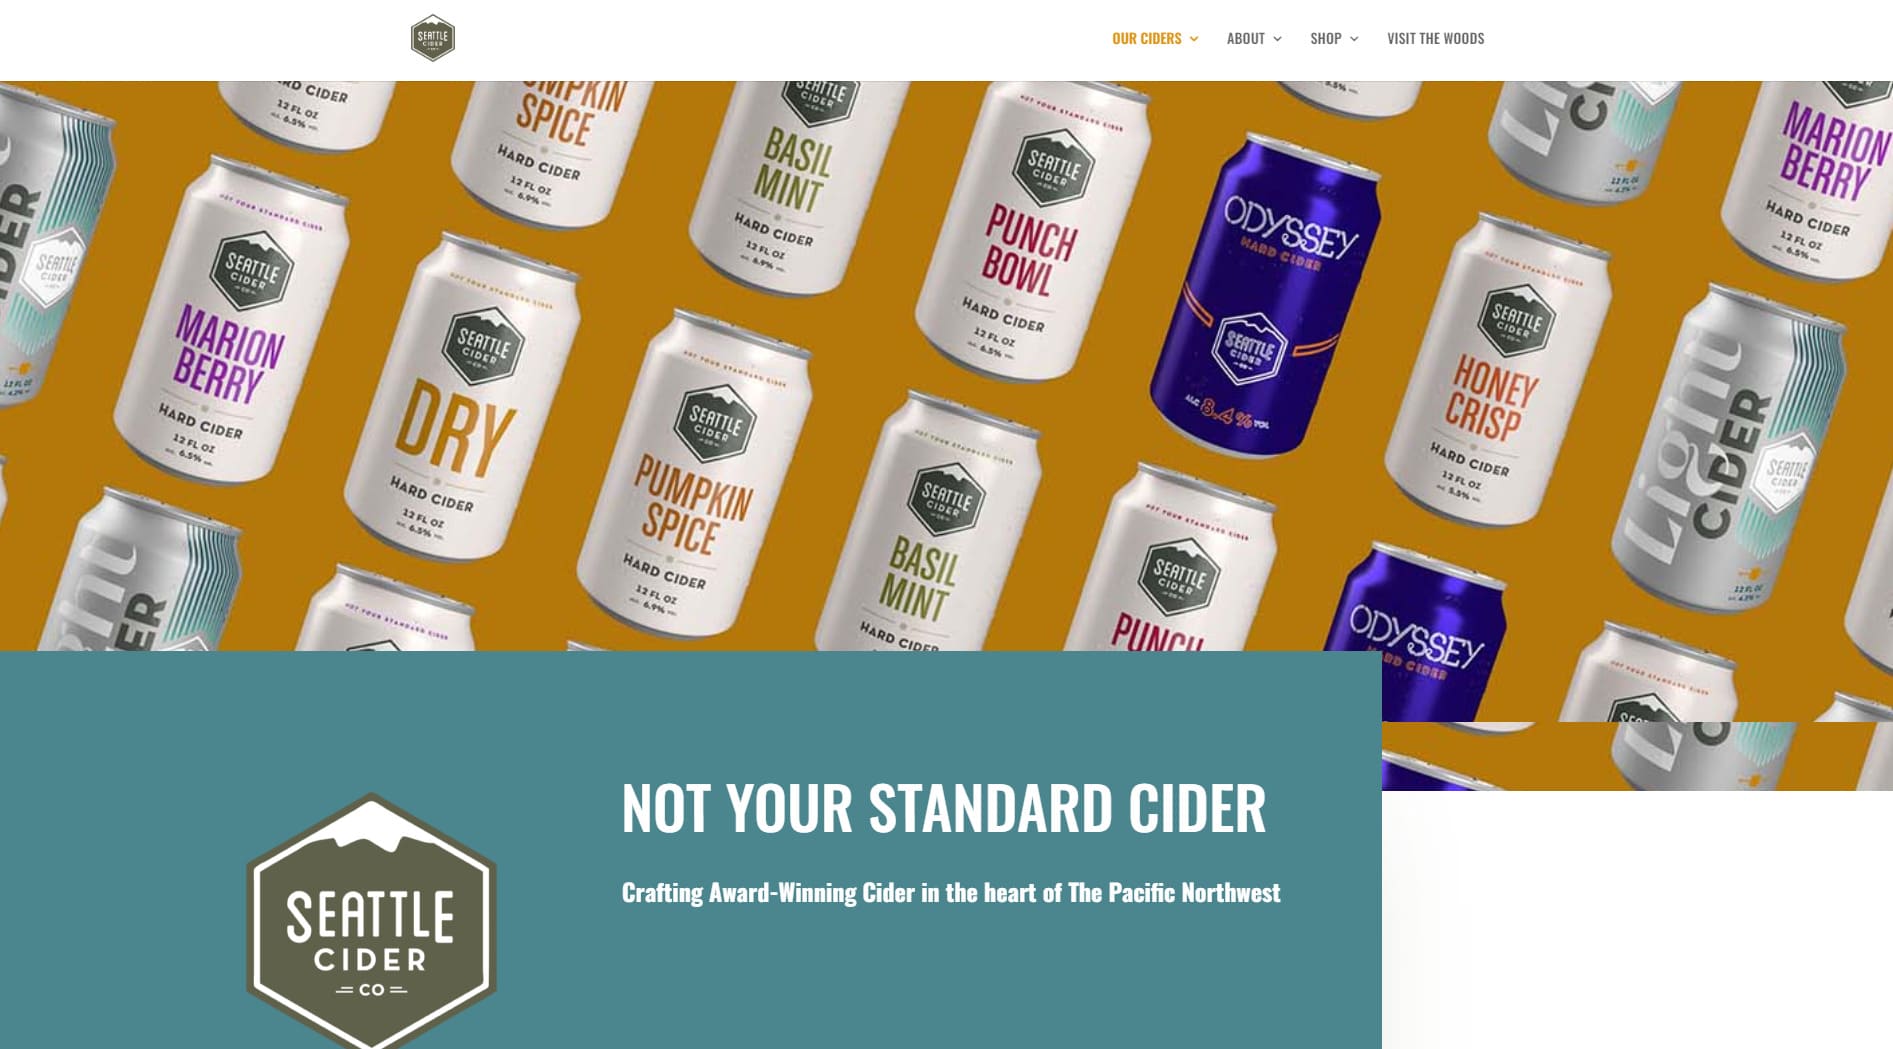 Seattle Cider best one product shopify stores